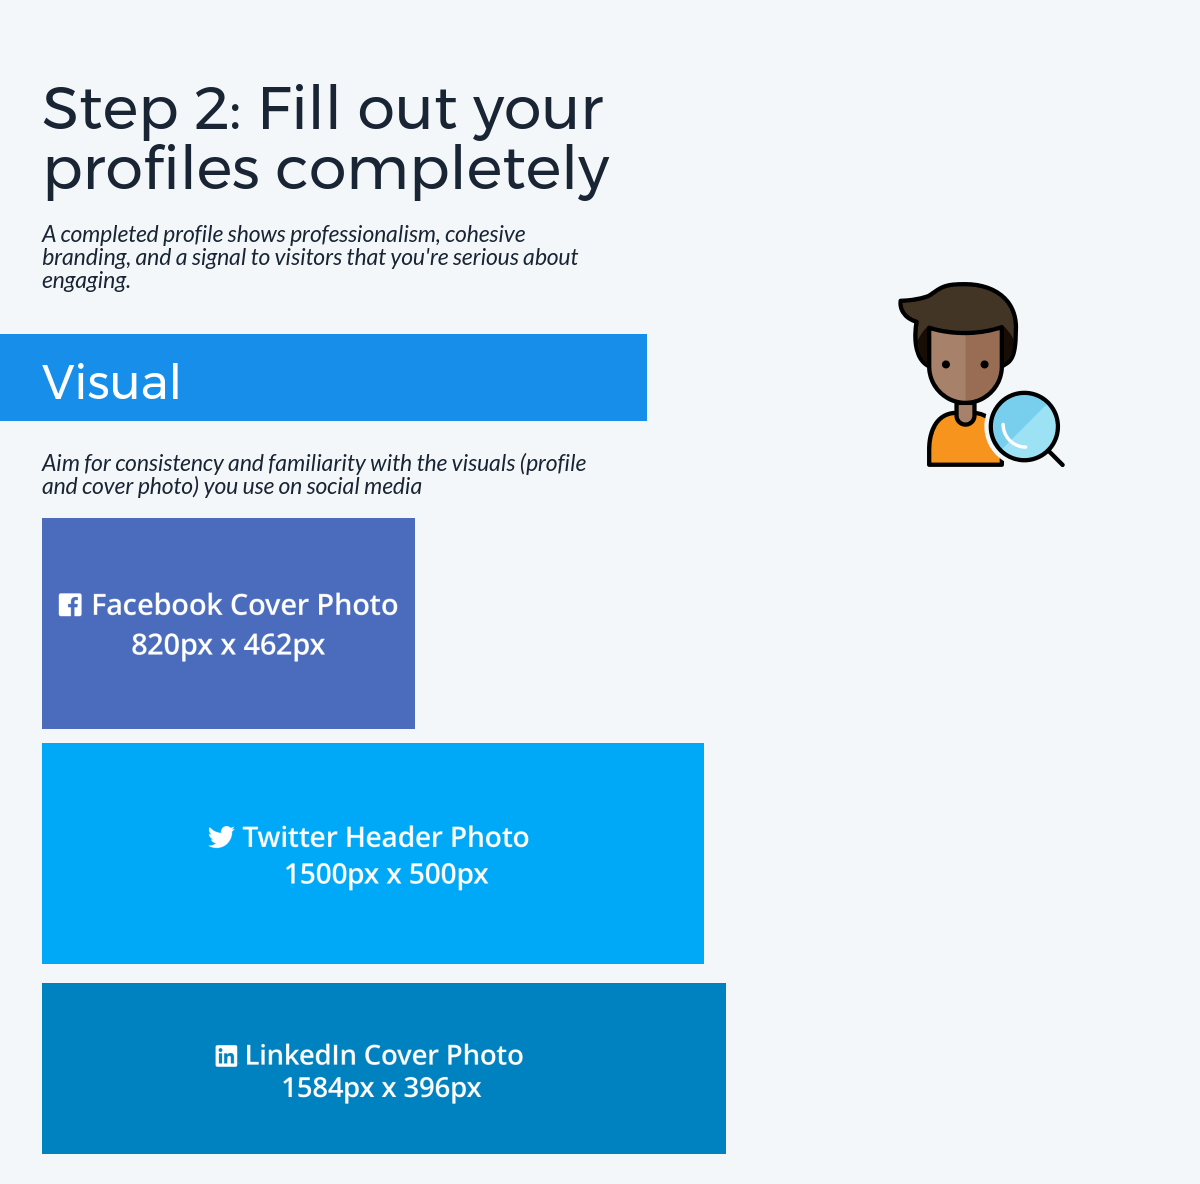 Step 2: Fill out profiles completely